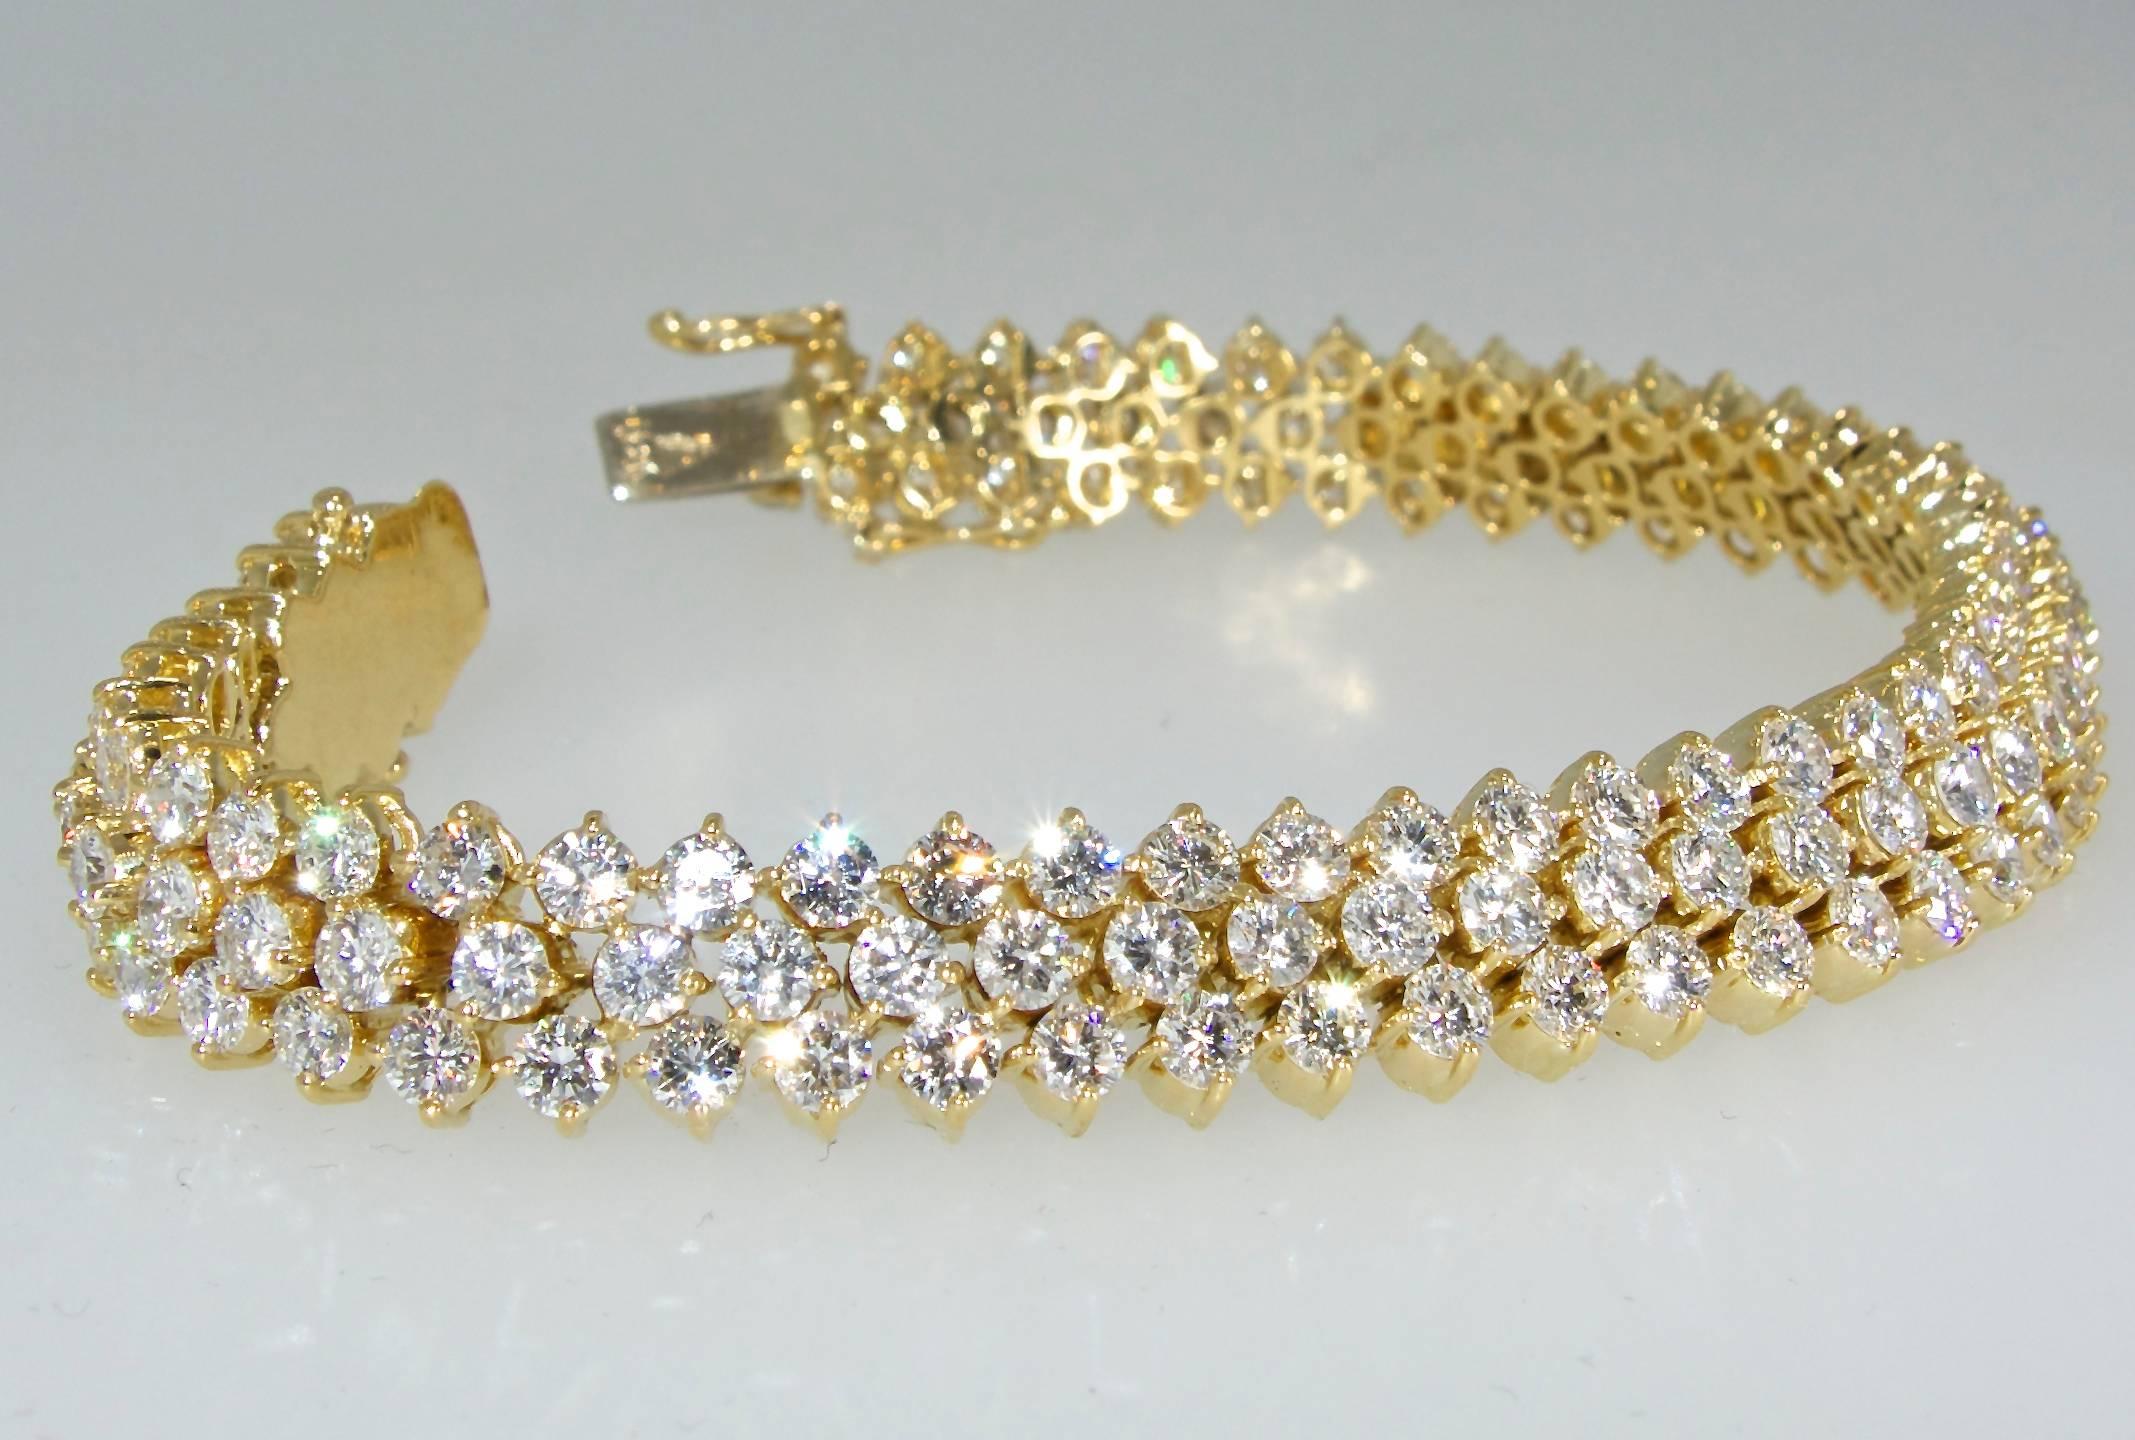 11.5 cts of fine white diamonds in 114 stones.  These well matched round brilliant cut diamonds are all G/H, very slightly included (VS1) and better, approximately.  The 18K yellow gold bracelet is 7 inches.